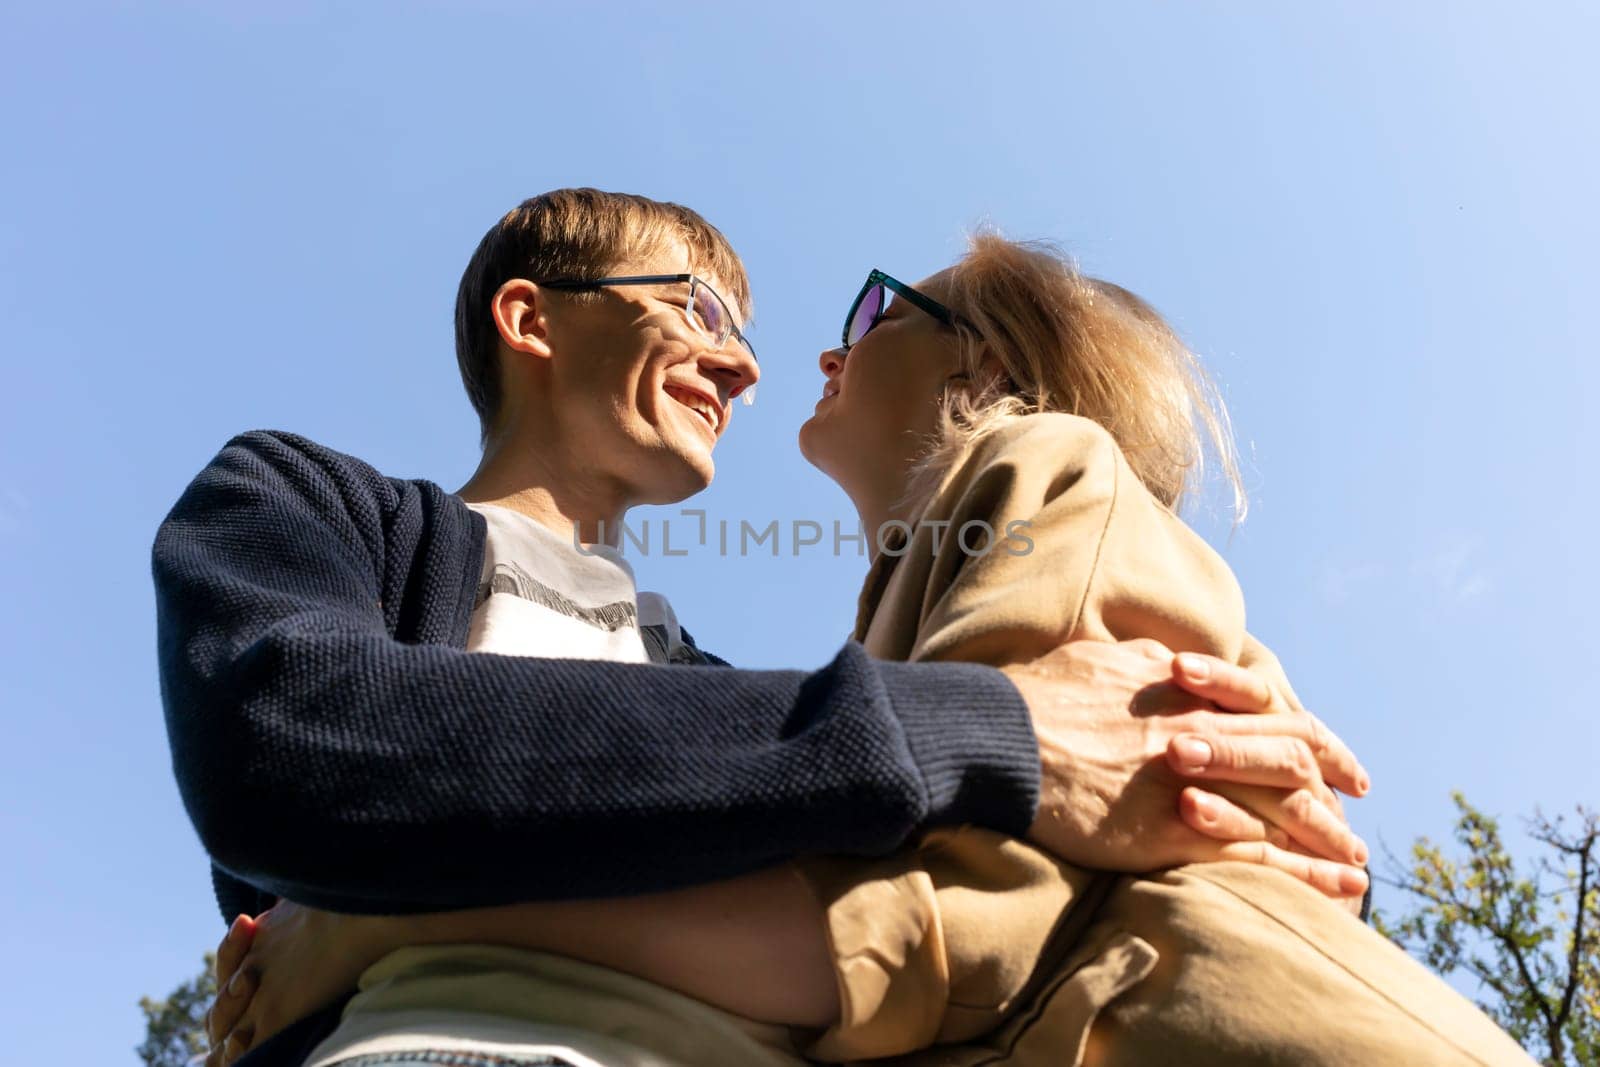 Hugging Happy Smiling Couple Looking At Eyes Of One Another, Blue Sky On Background. Relationship, Togetherness. Enjoying Time Together. Feelings. Vertical Plane Summer Time. High quality photo